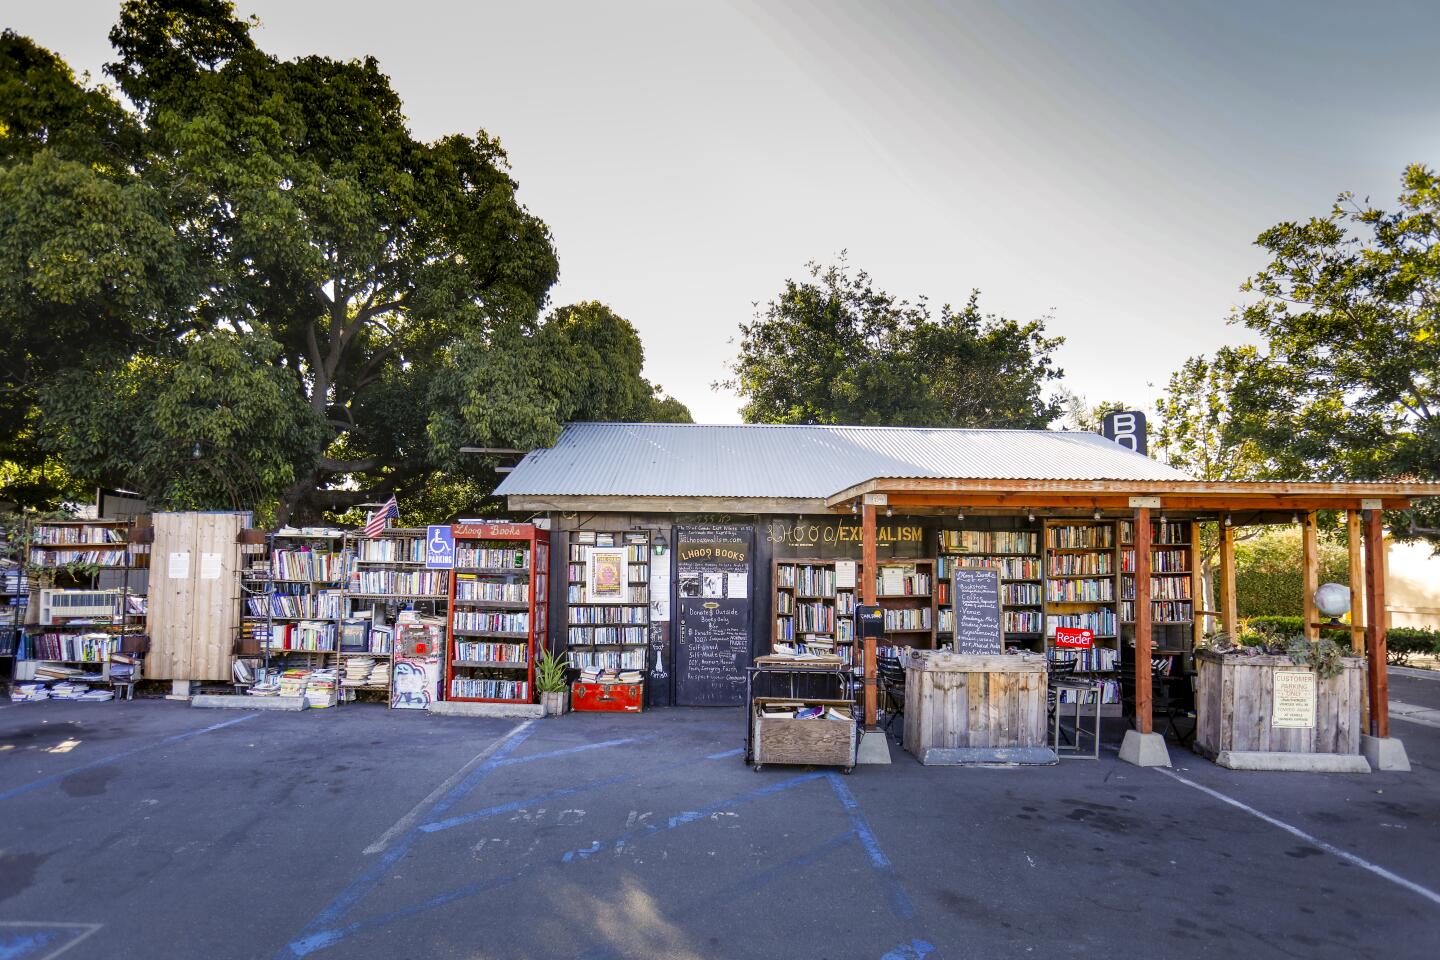 Recently the owner of Lhooq Books, a funky vintage bookstore that has operated in Carlsbad Village for the past 12 years, Sean Christopher received a 60-day eviction notice for both the shop and the adjoining house where he has raised his 10-year-old son, Jack, alone. He's hoping to achieve a stay of eviction on the property long enough to sell off his book inventory and find a new space without going bankrupt and ending up homeless with his son.